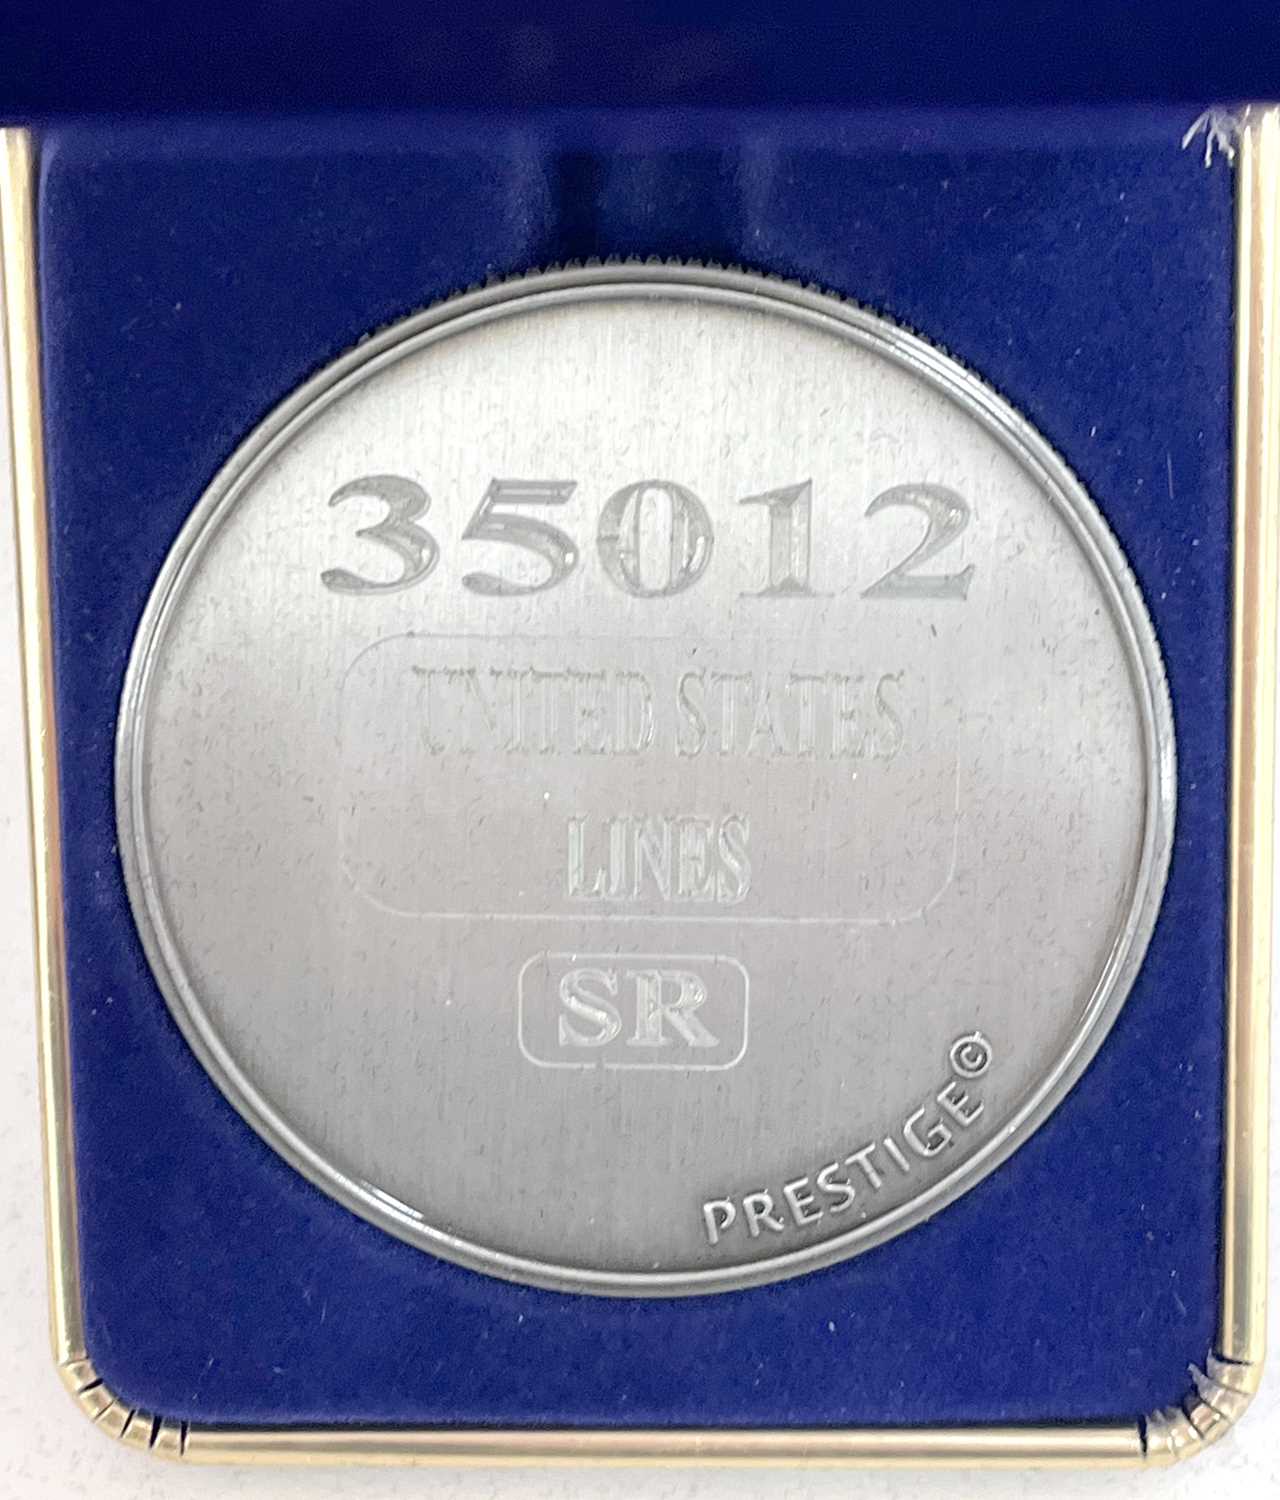 A commemorative silver award medallion to 35012 United States Lines SR - Image 2 of 2